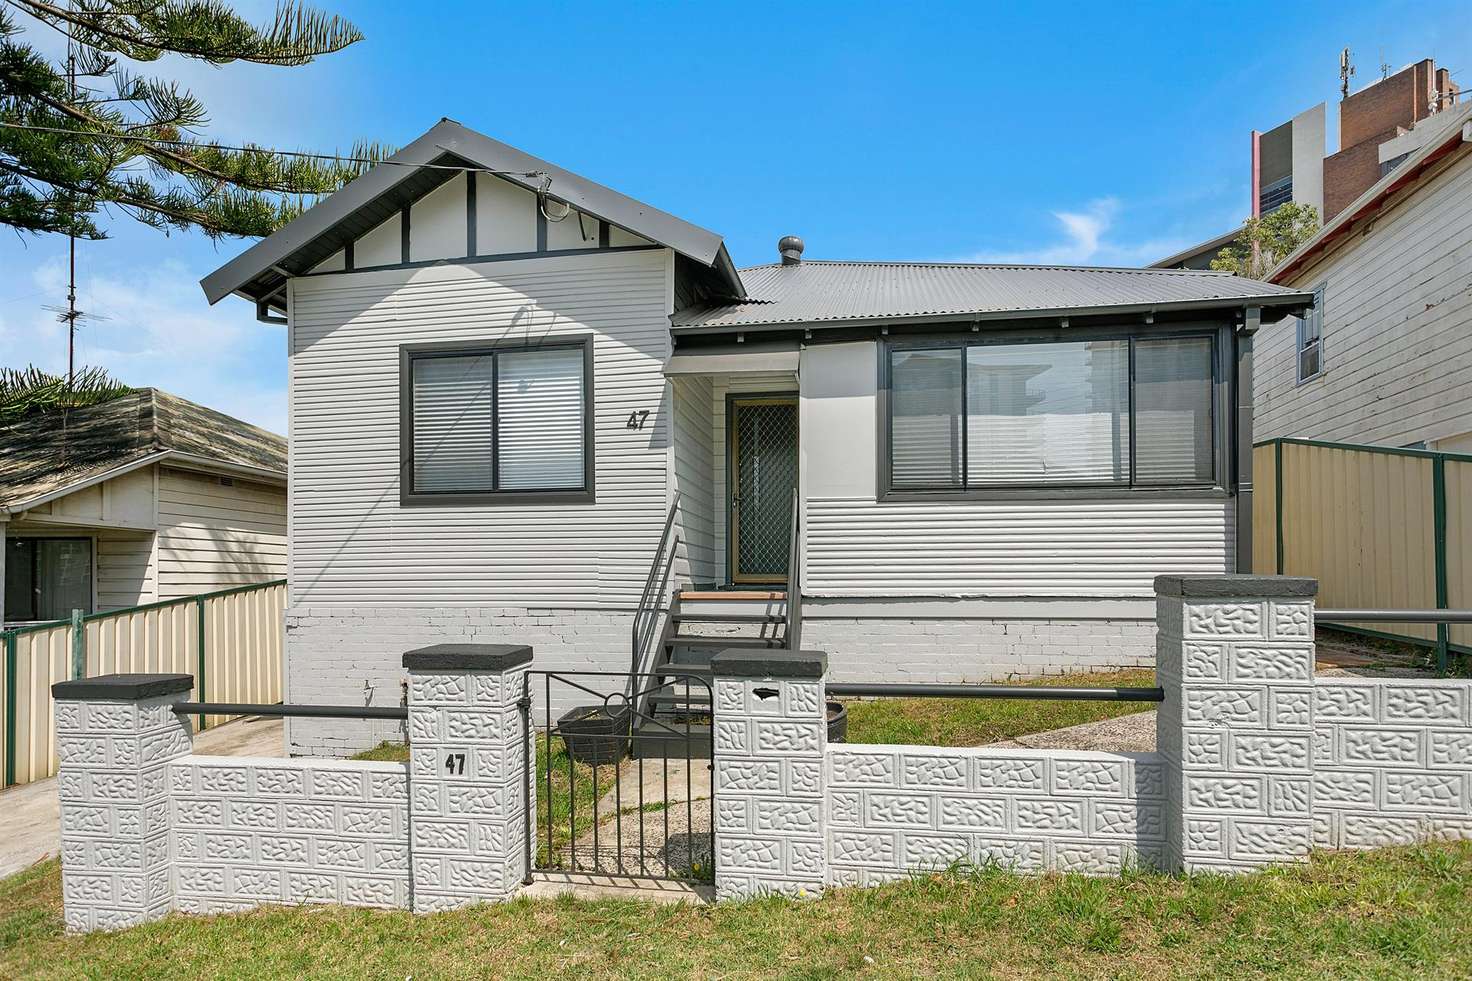 Main view of Homely house listing, 47 Osborne Street, Wollongong NSW 2500